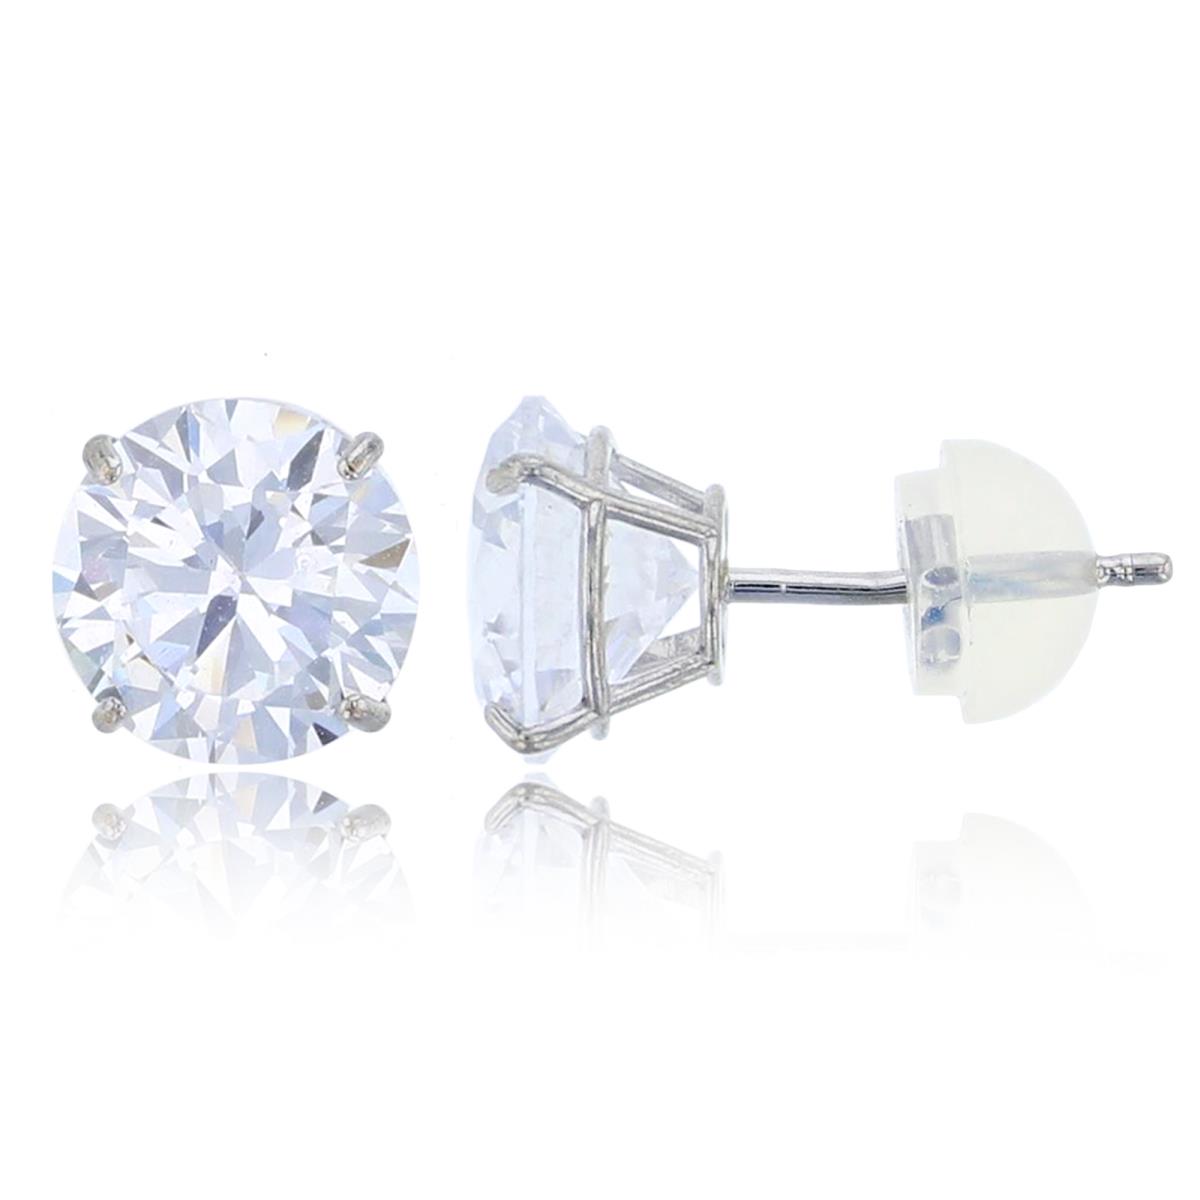 14K White Gold 8mm Round Cut Solitaire Stud Earring